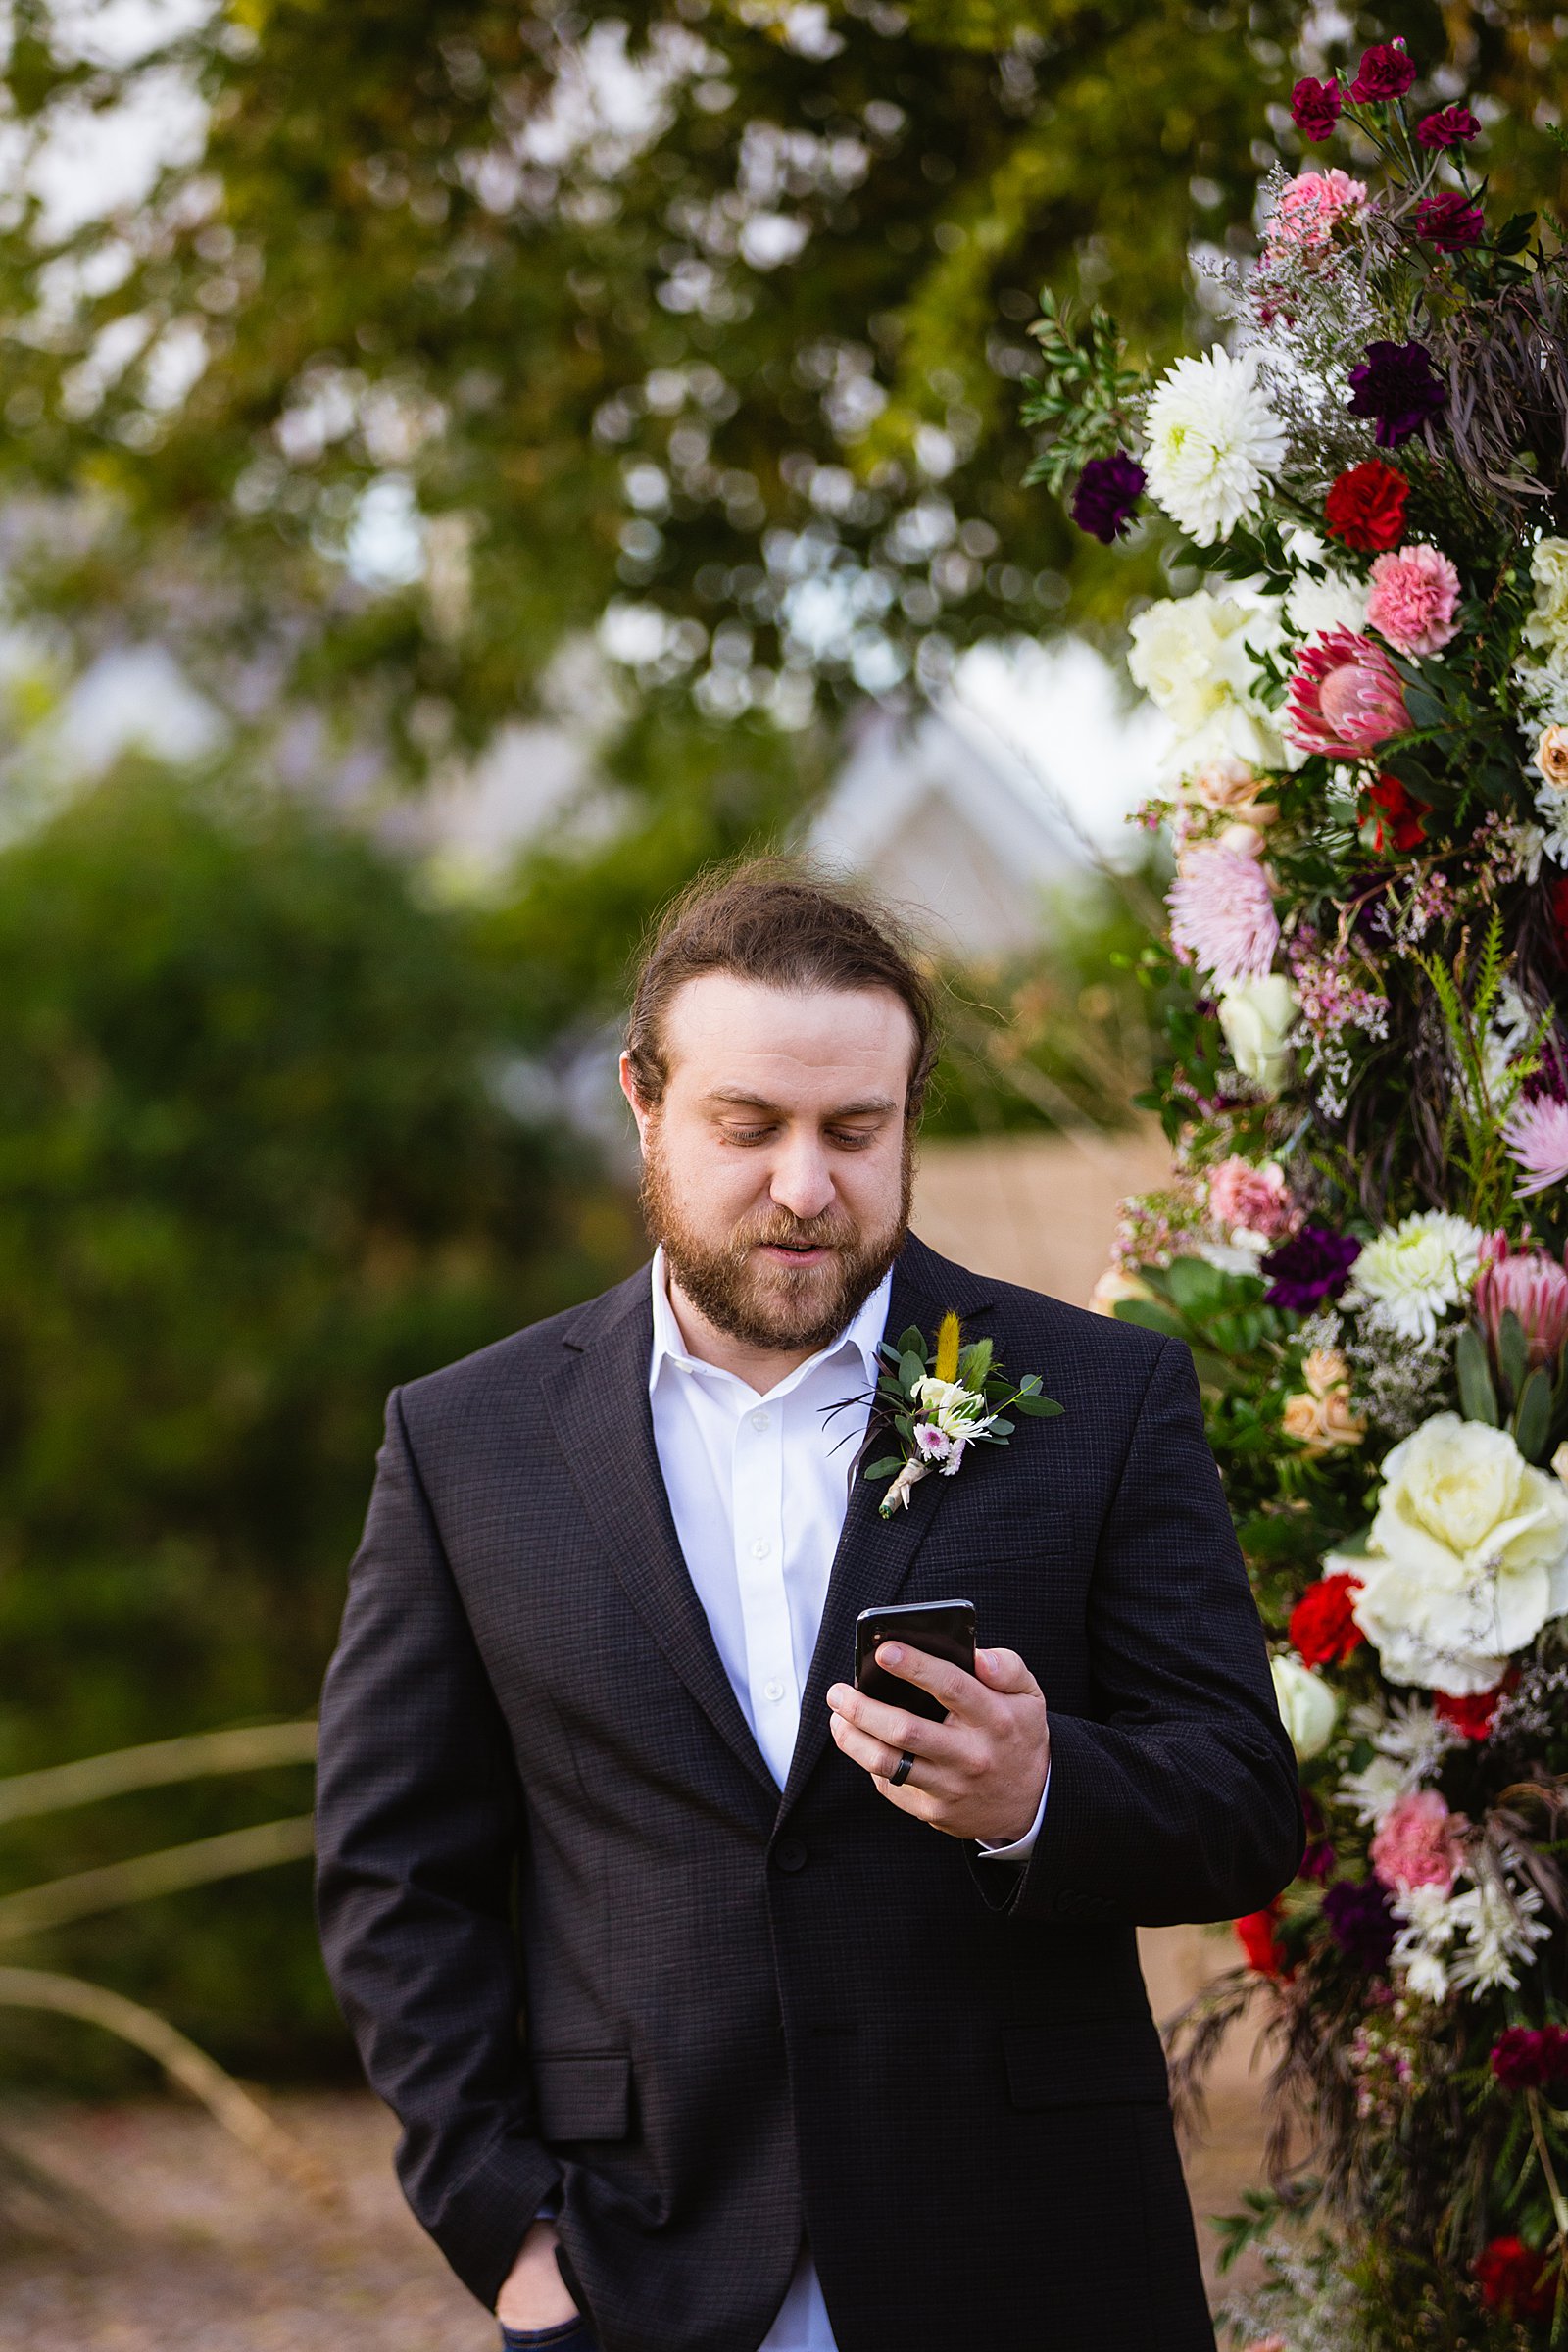 Groom looking at his bride during their wedding ceremony at Backyard by Phoenix wedding photographer PMA Photography.